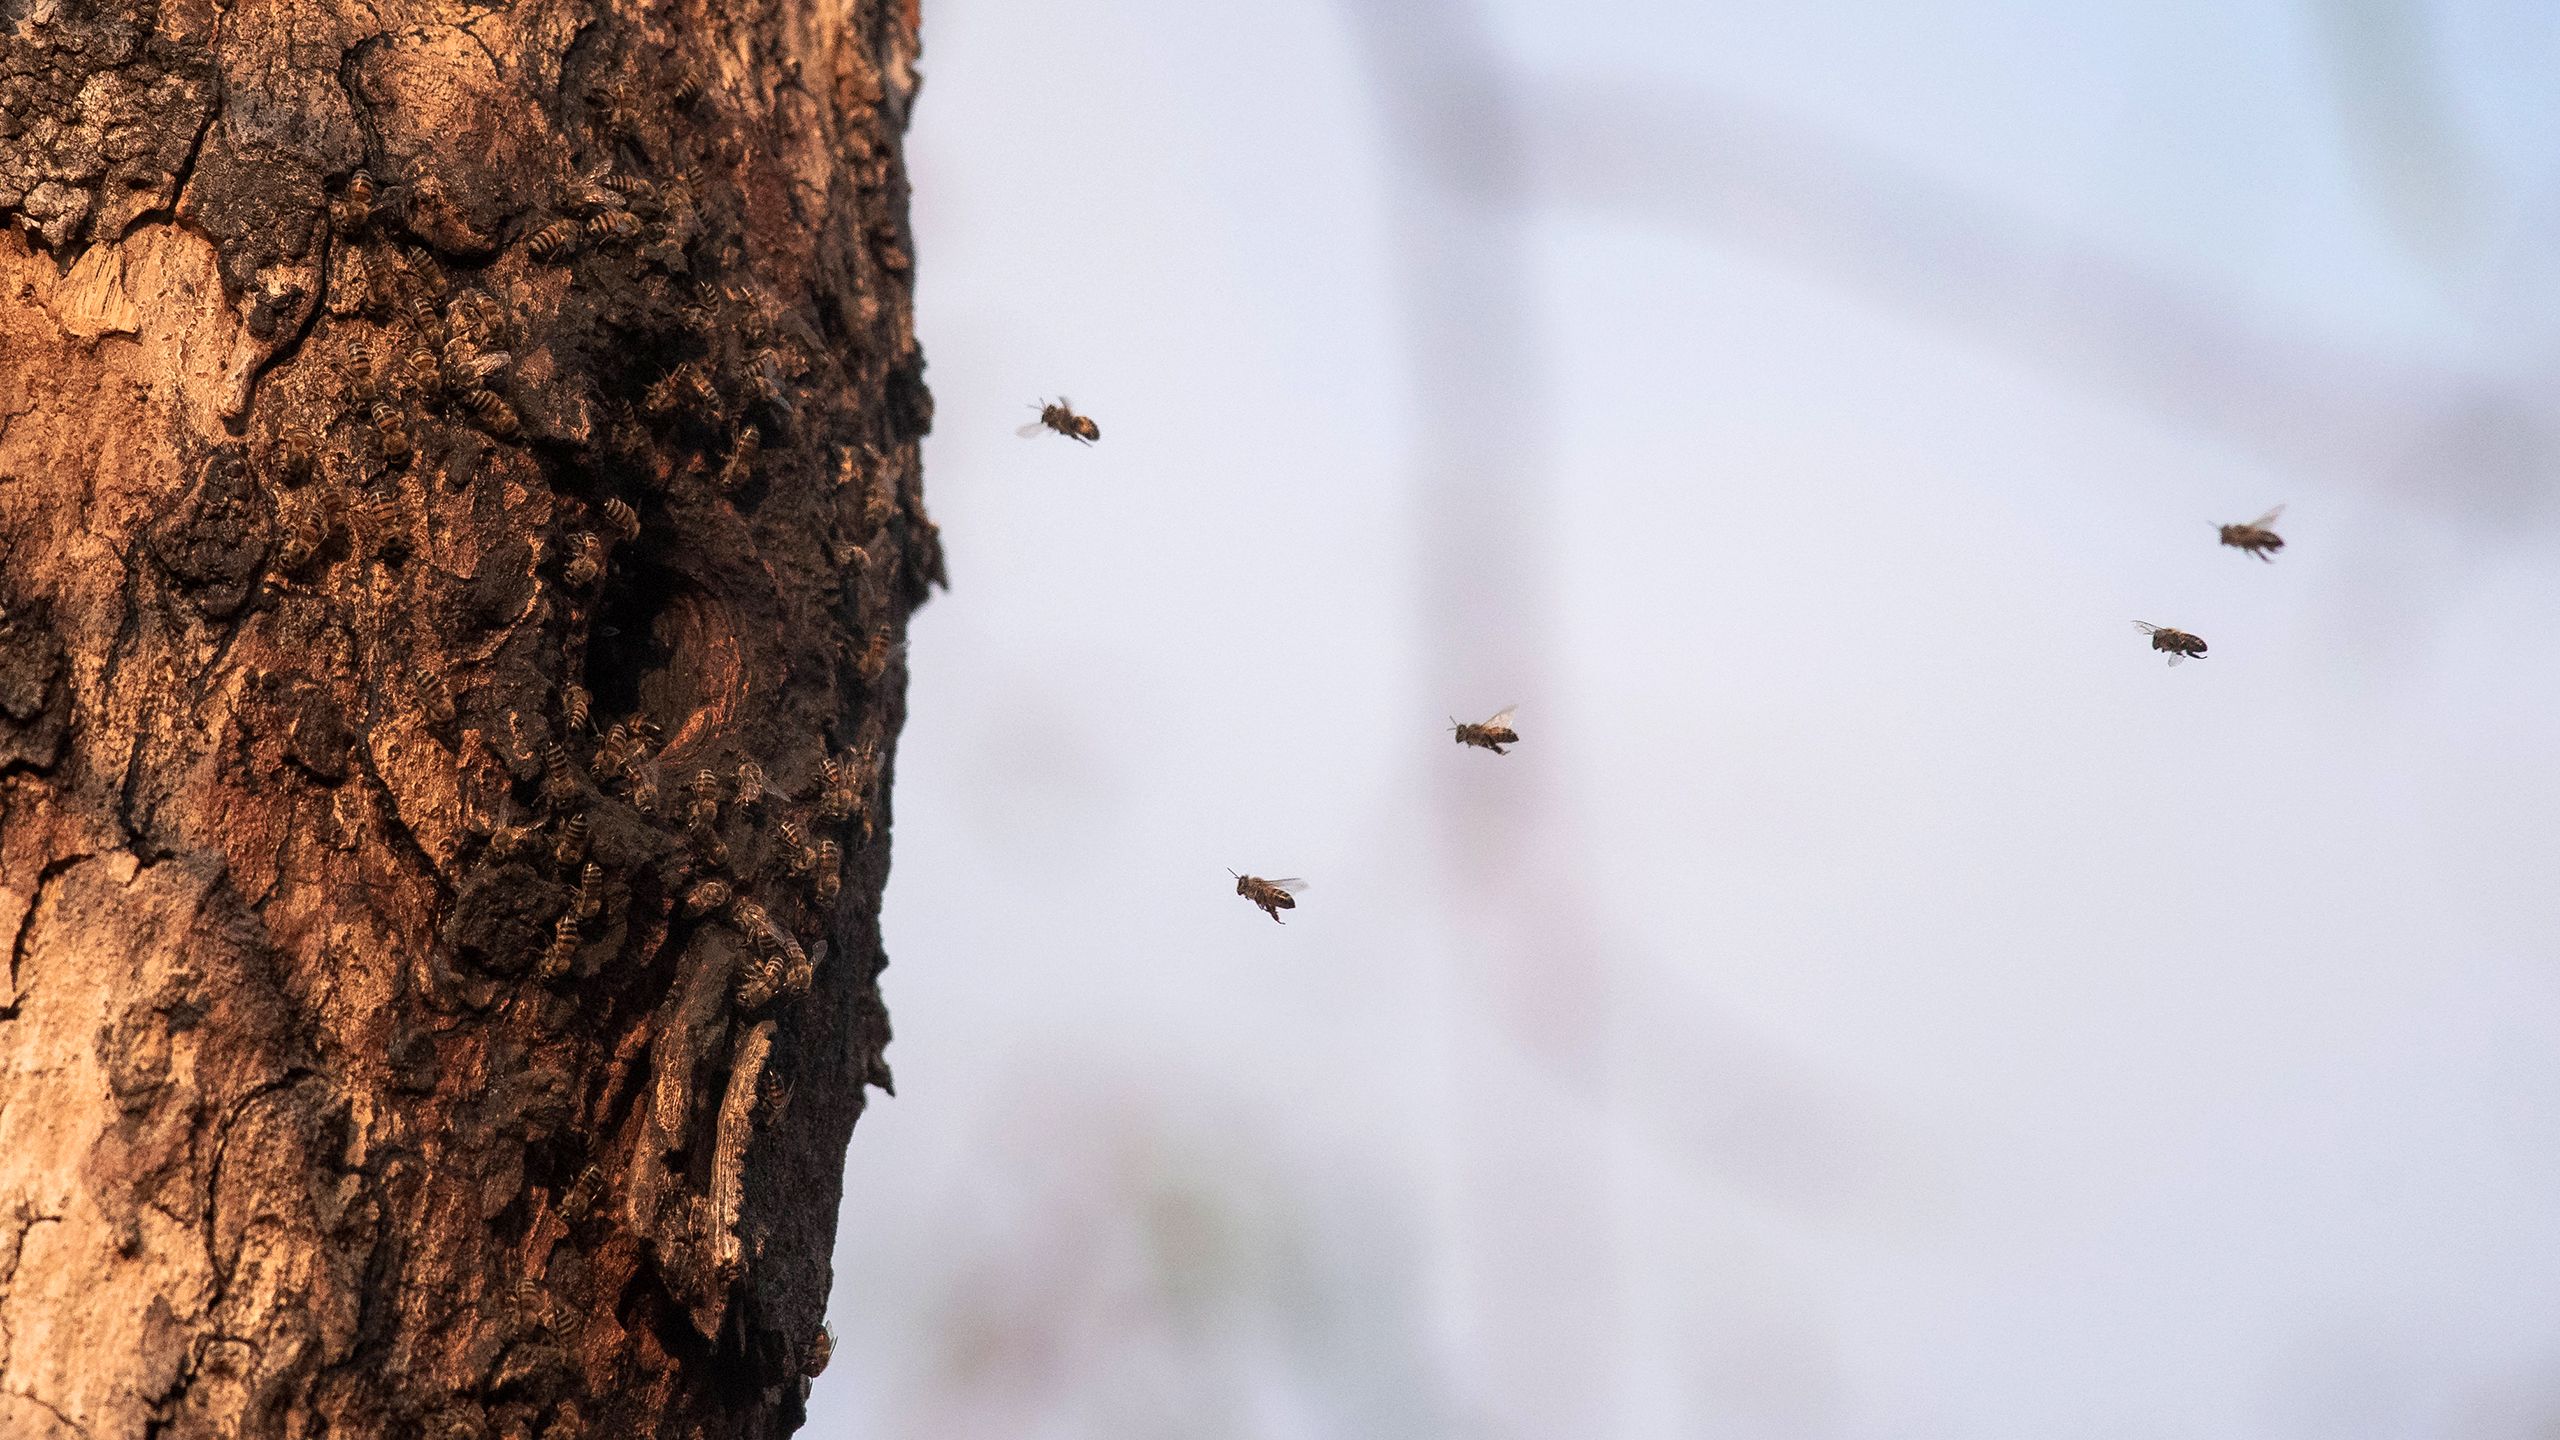 Honeybees nesting in a tree cavity in Mozambique. Photo: Dominic Cram